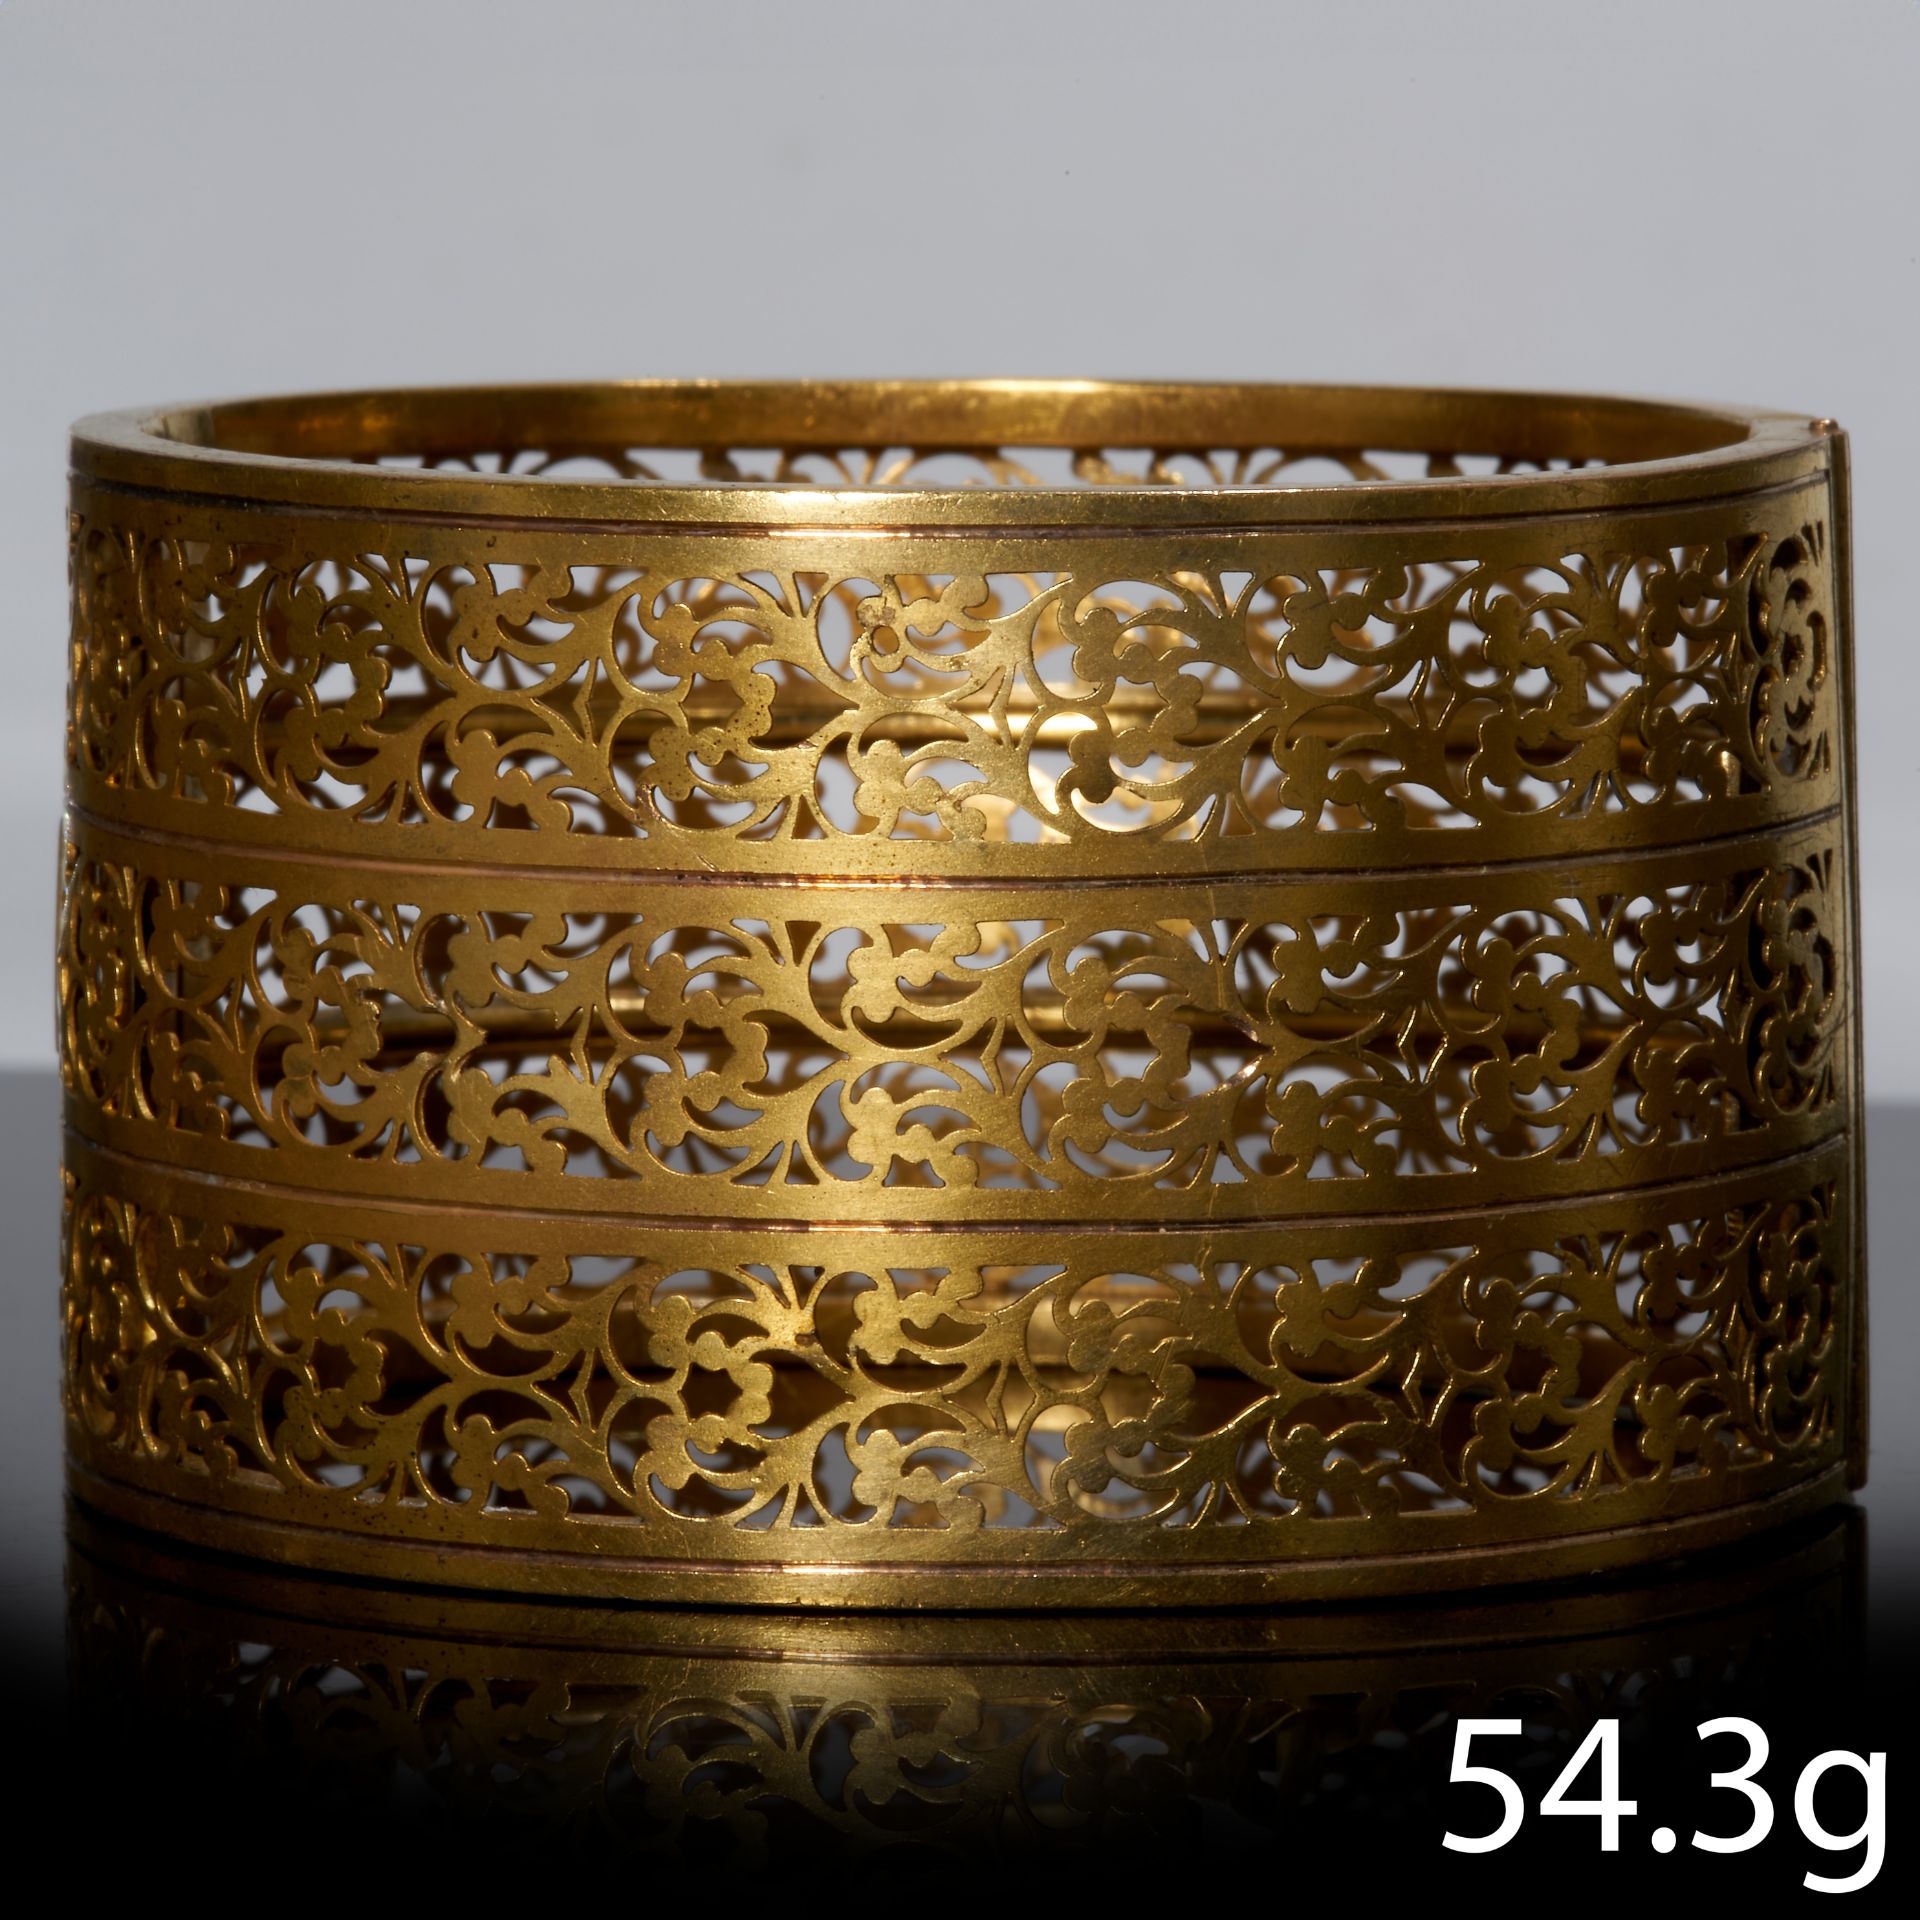 ANTIQUE WIDE CUFF HINGED BANGLE